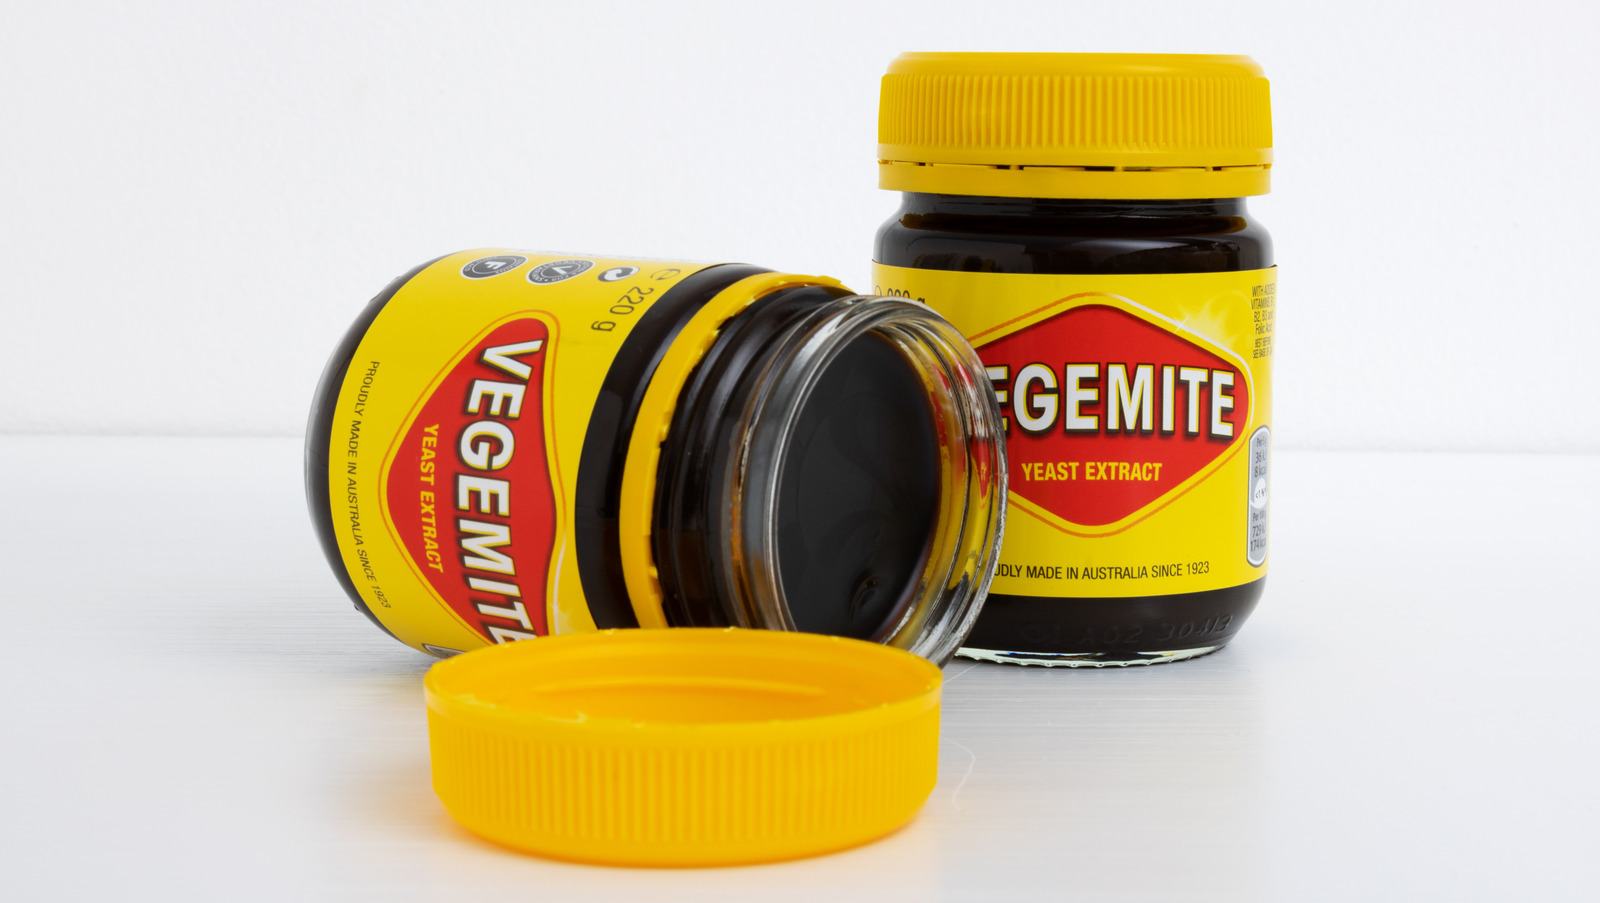 The Real Reason Some Australian Jails Have Banned Vegemite